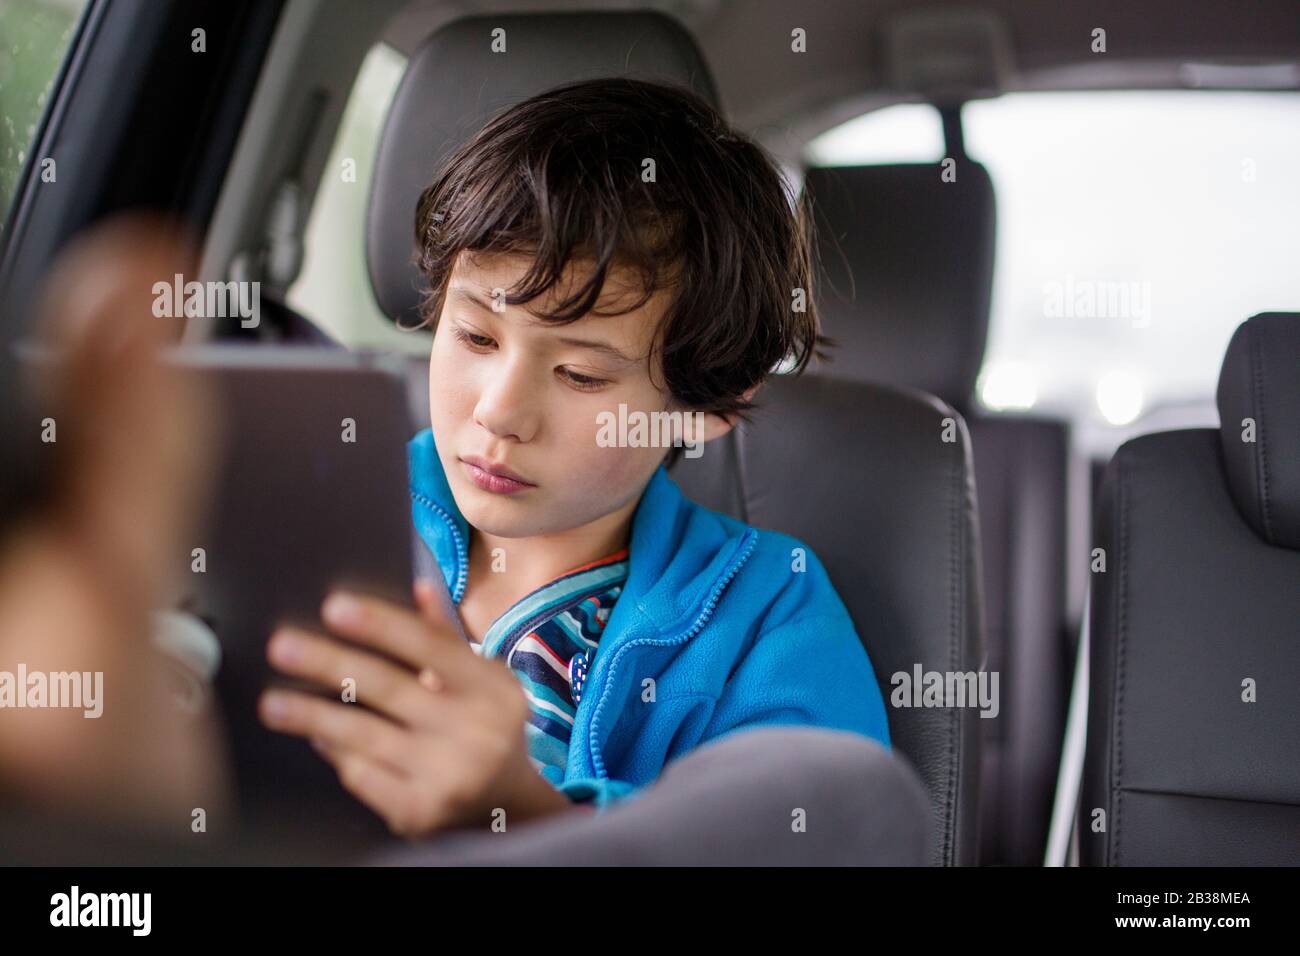 A boy sits in a carseat on a car trip watching a tablet Stock Photo